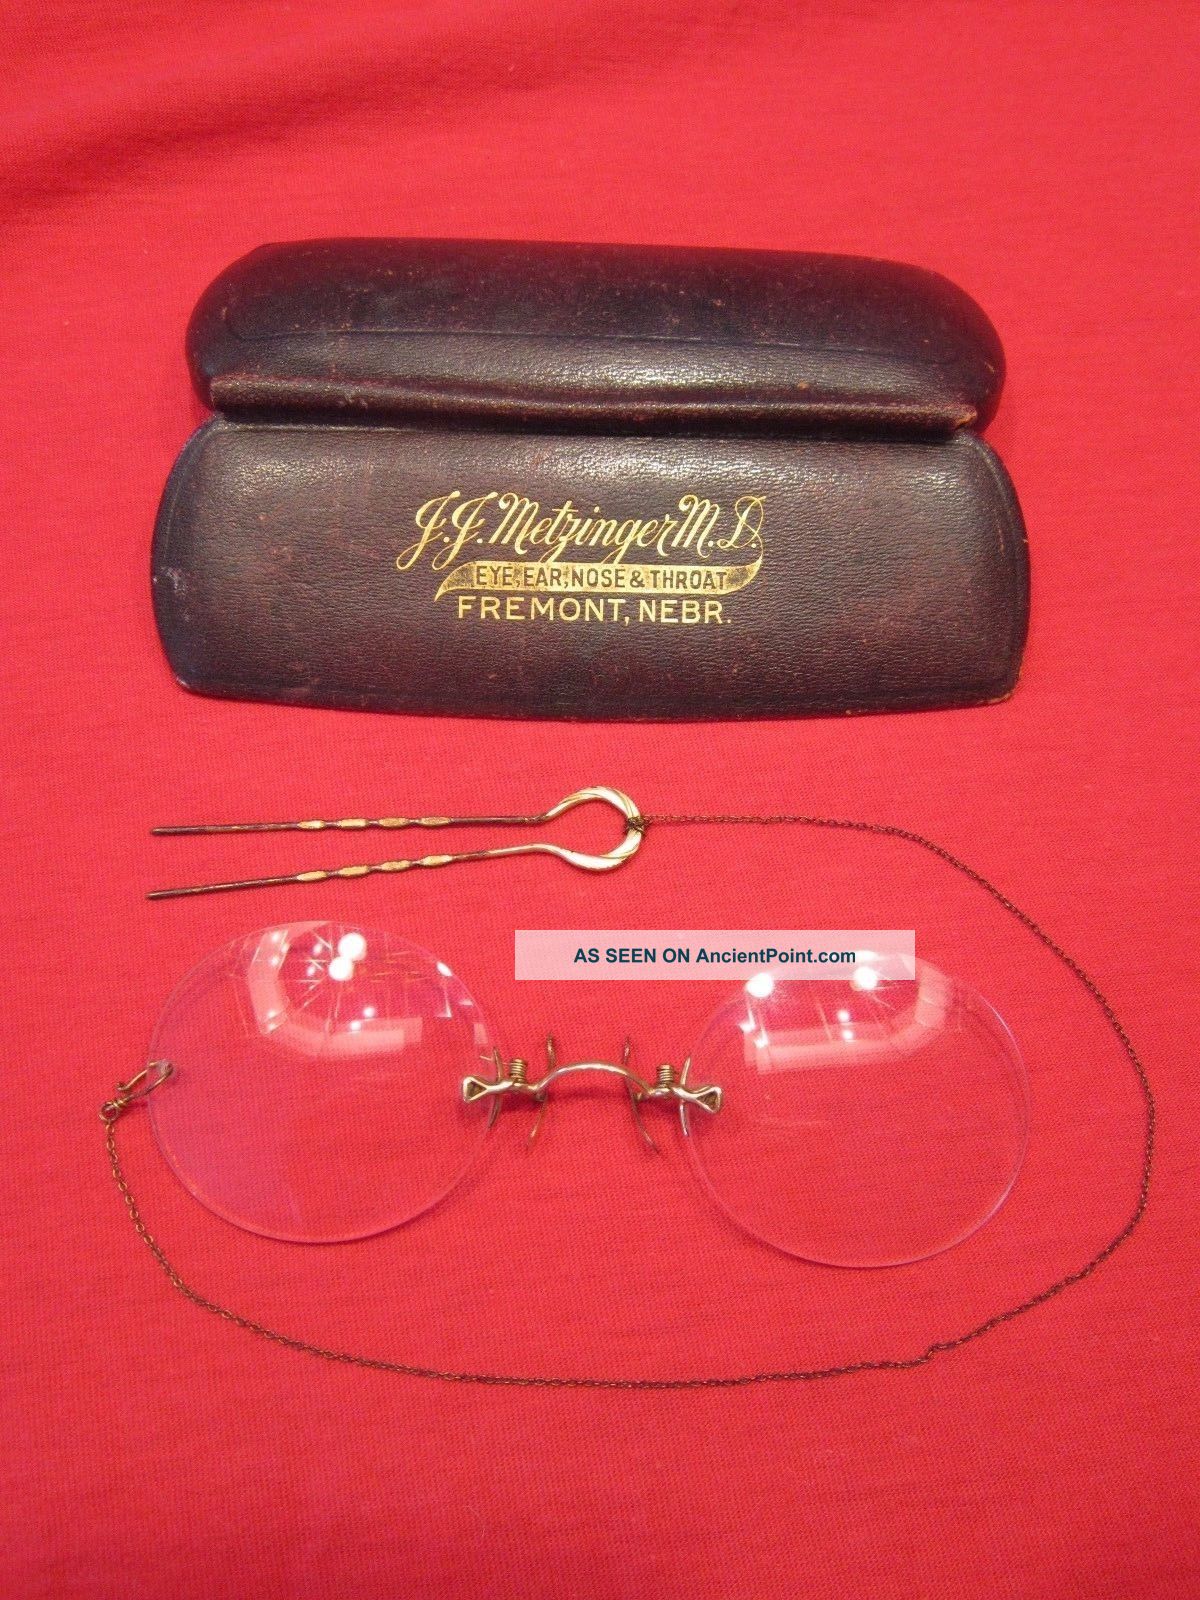 Spectacles Pince - Nez Vintage Eyeglasses Gold Nose Clip,  Hair Pin Chain & Case Optical photo